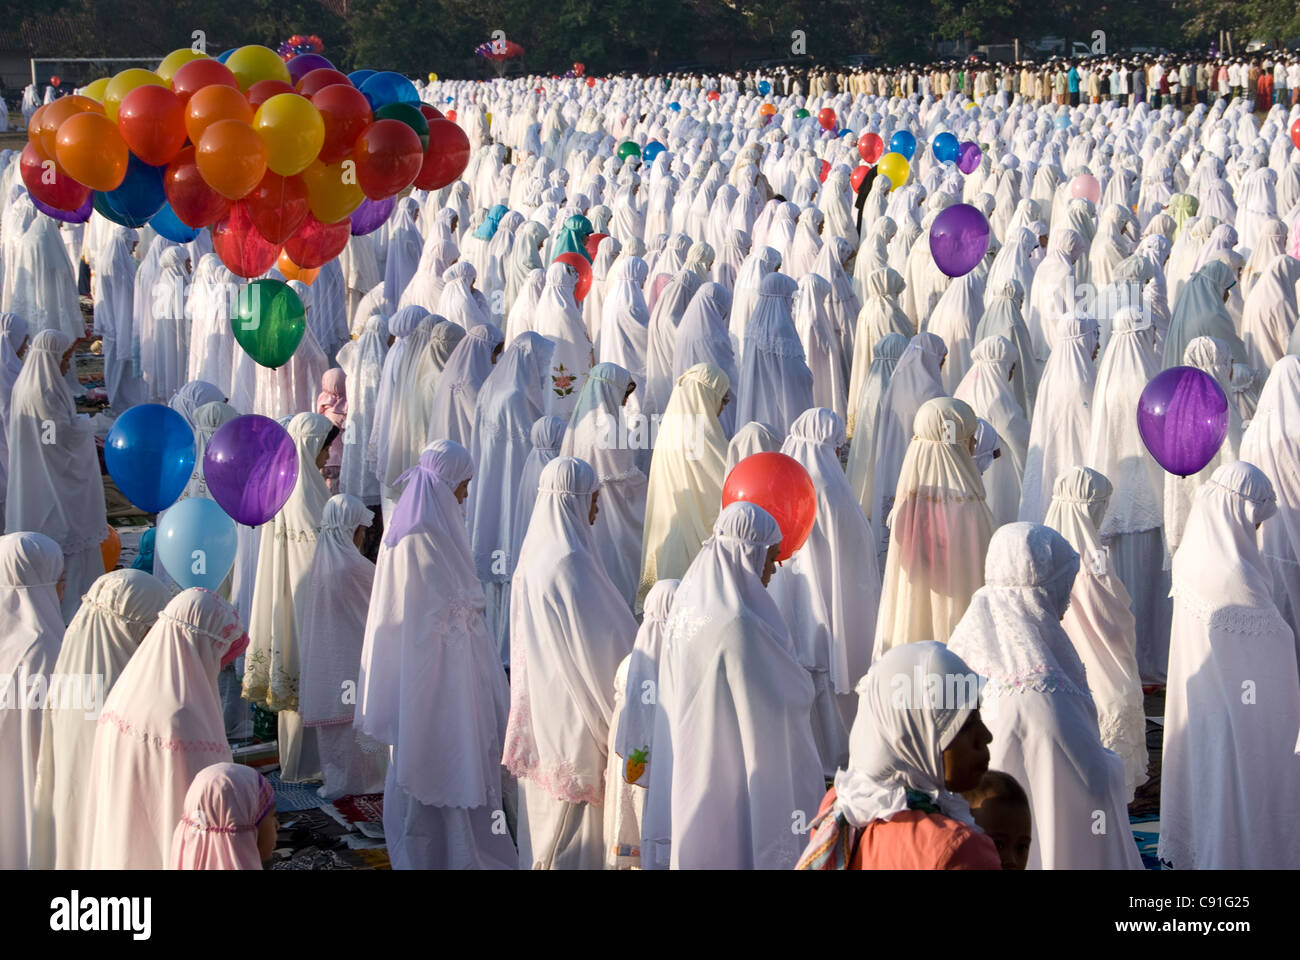 Women and girls standing wearing hijab muslim dress with balloons, Idul Fitri ceremony, Denpasar, Bali, Indonesia Stock Photo